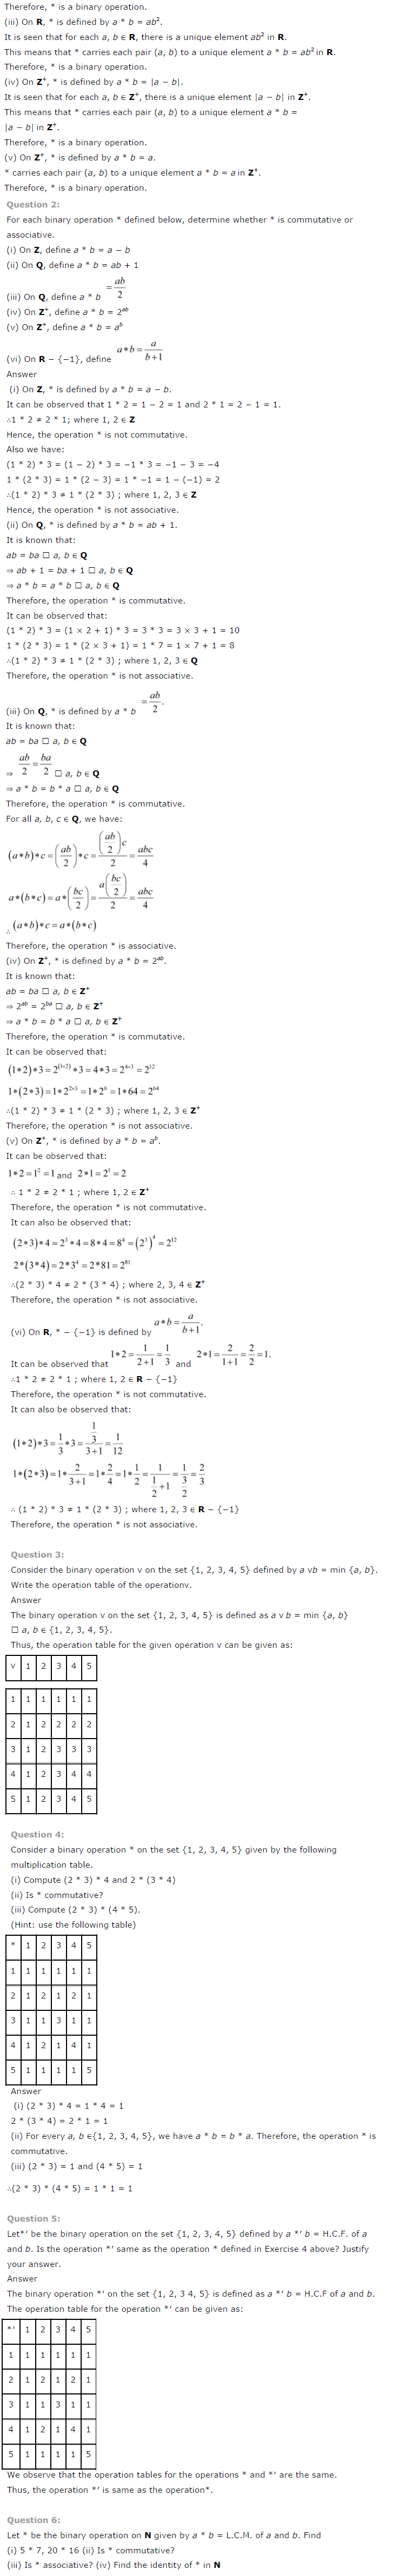 NCERT Solutions For Class 12 Maths Chapter 1 Relations and Functions-8